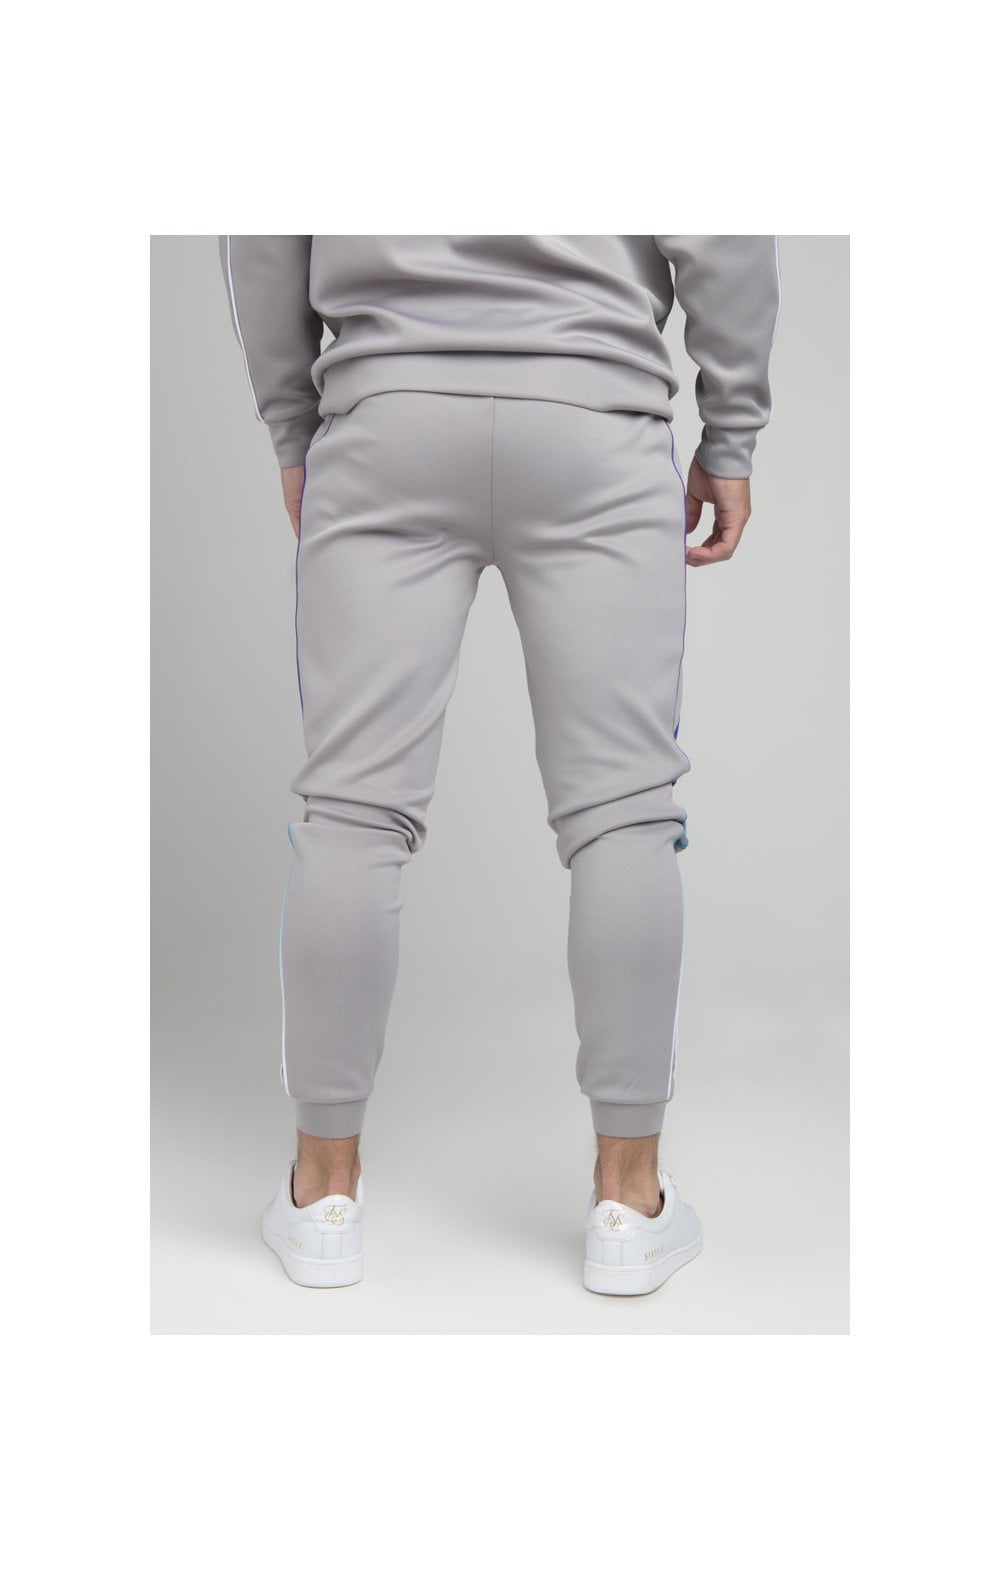 Load image into Gallery viewer, Illusive London Poly Piped Pants - Light Grey (2)